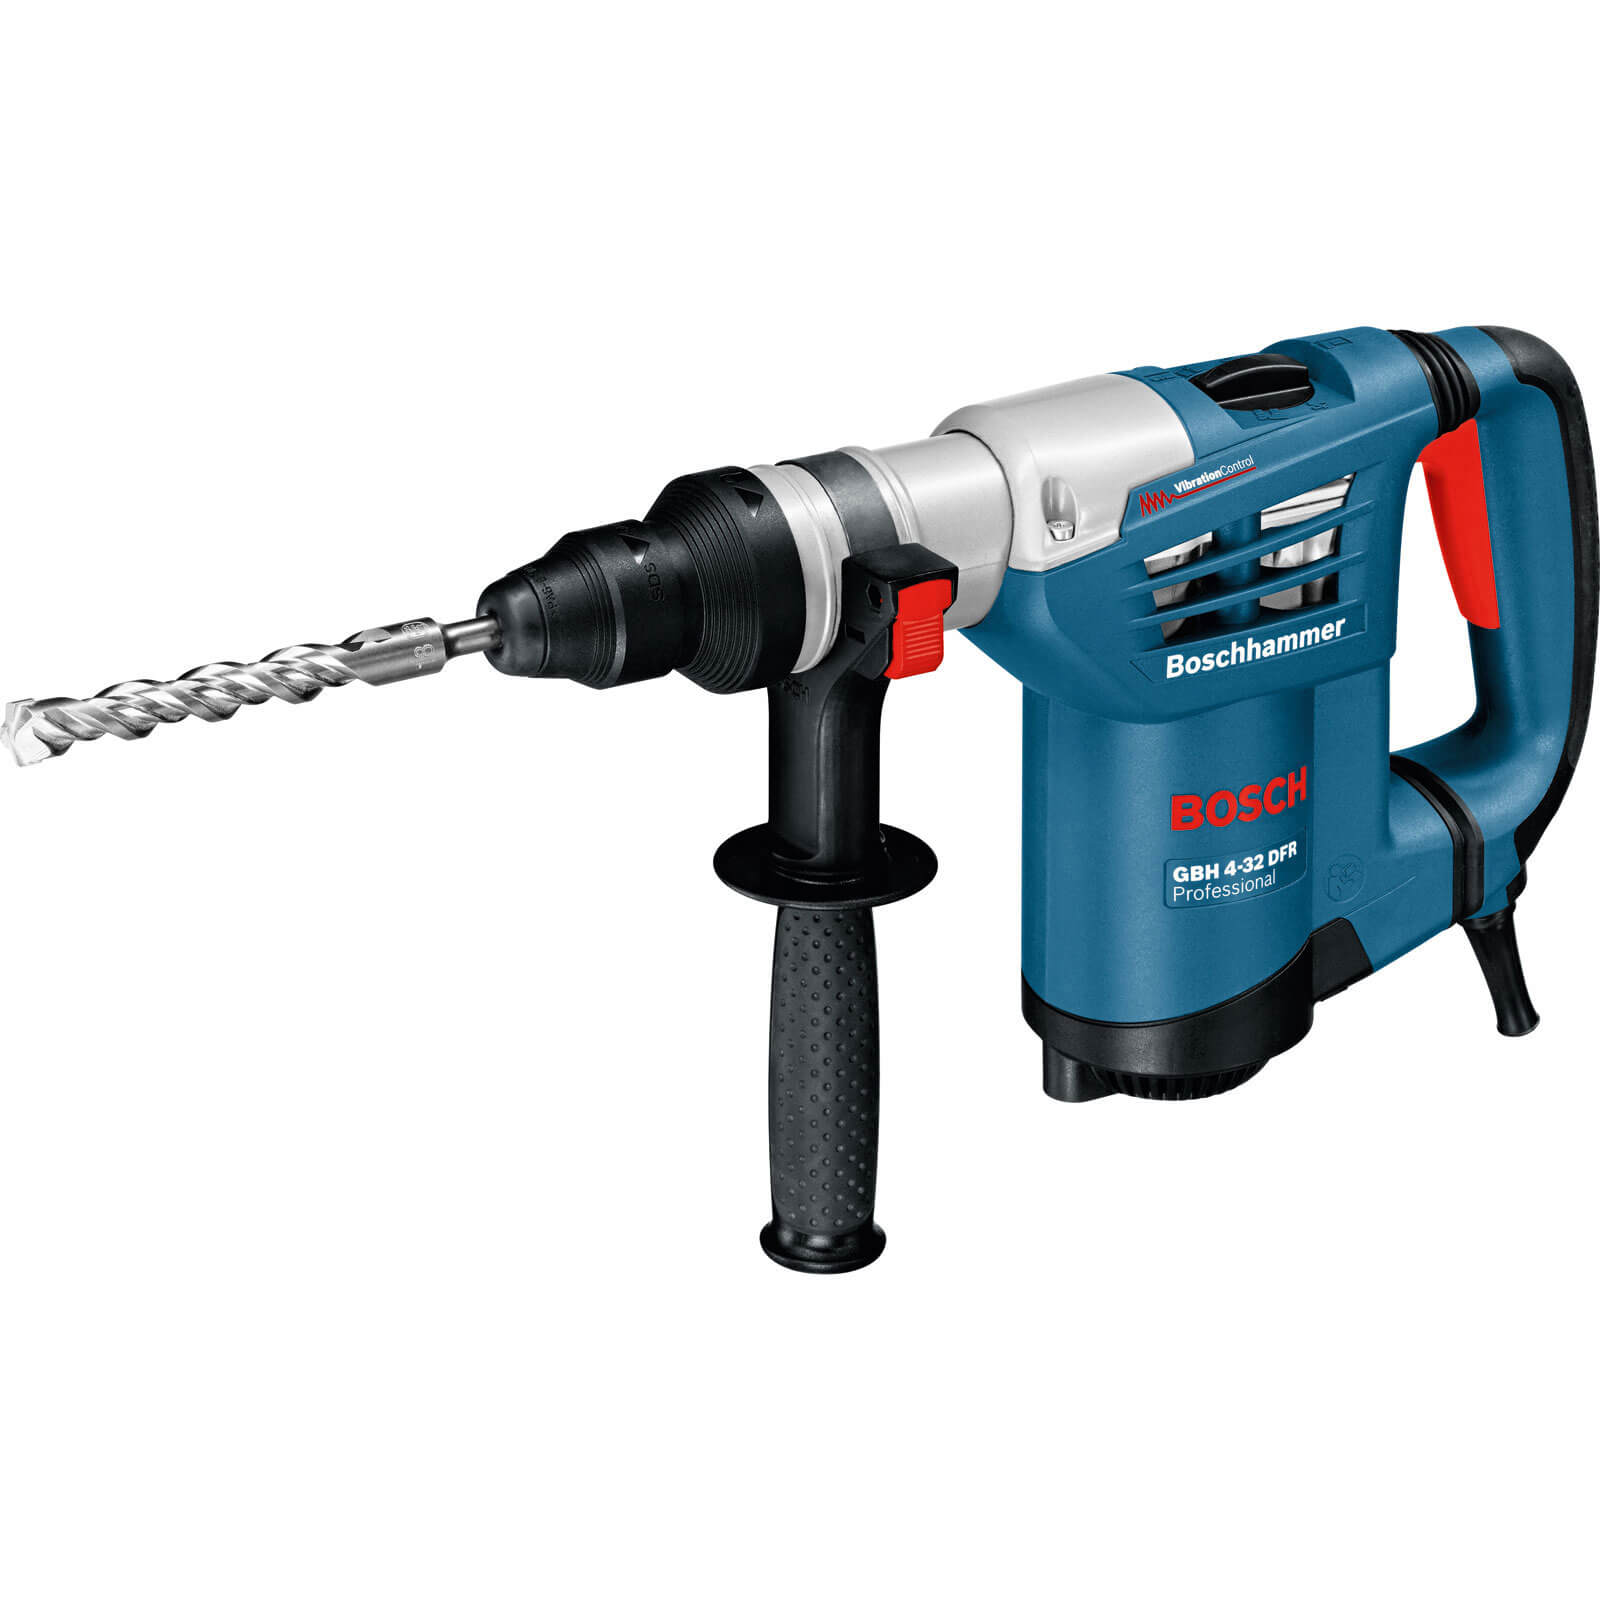 Image of Bosch GBH 4 32 DFR SDS Plus Rotary Hammer Drill 240v